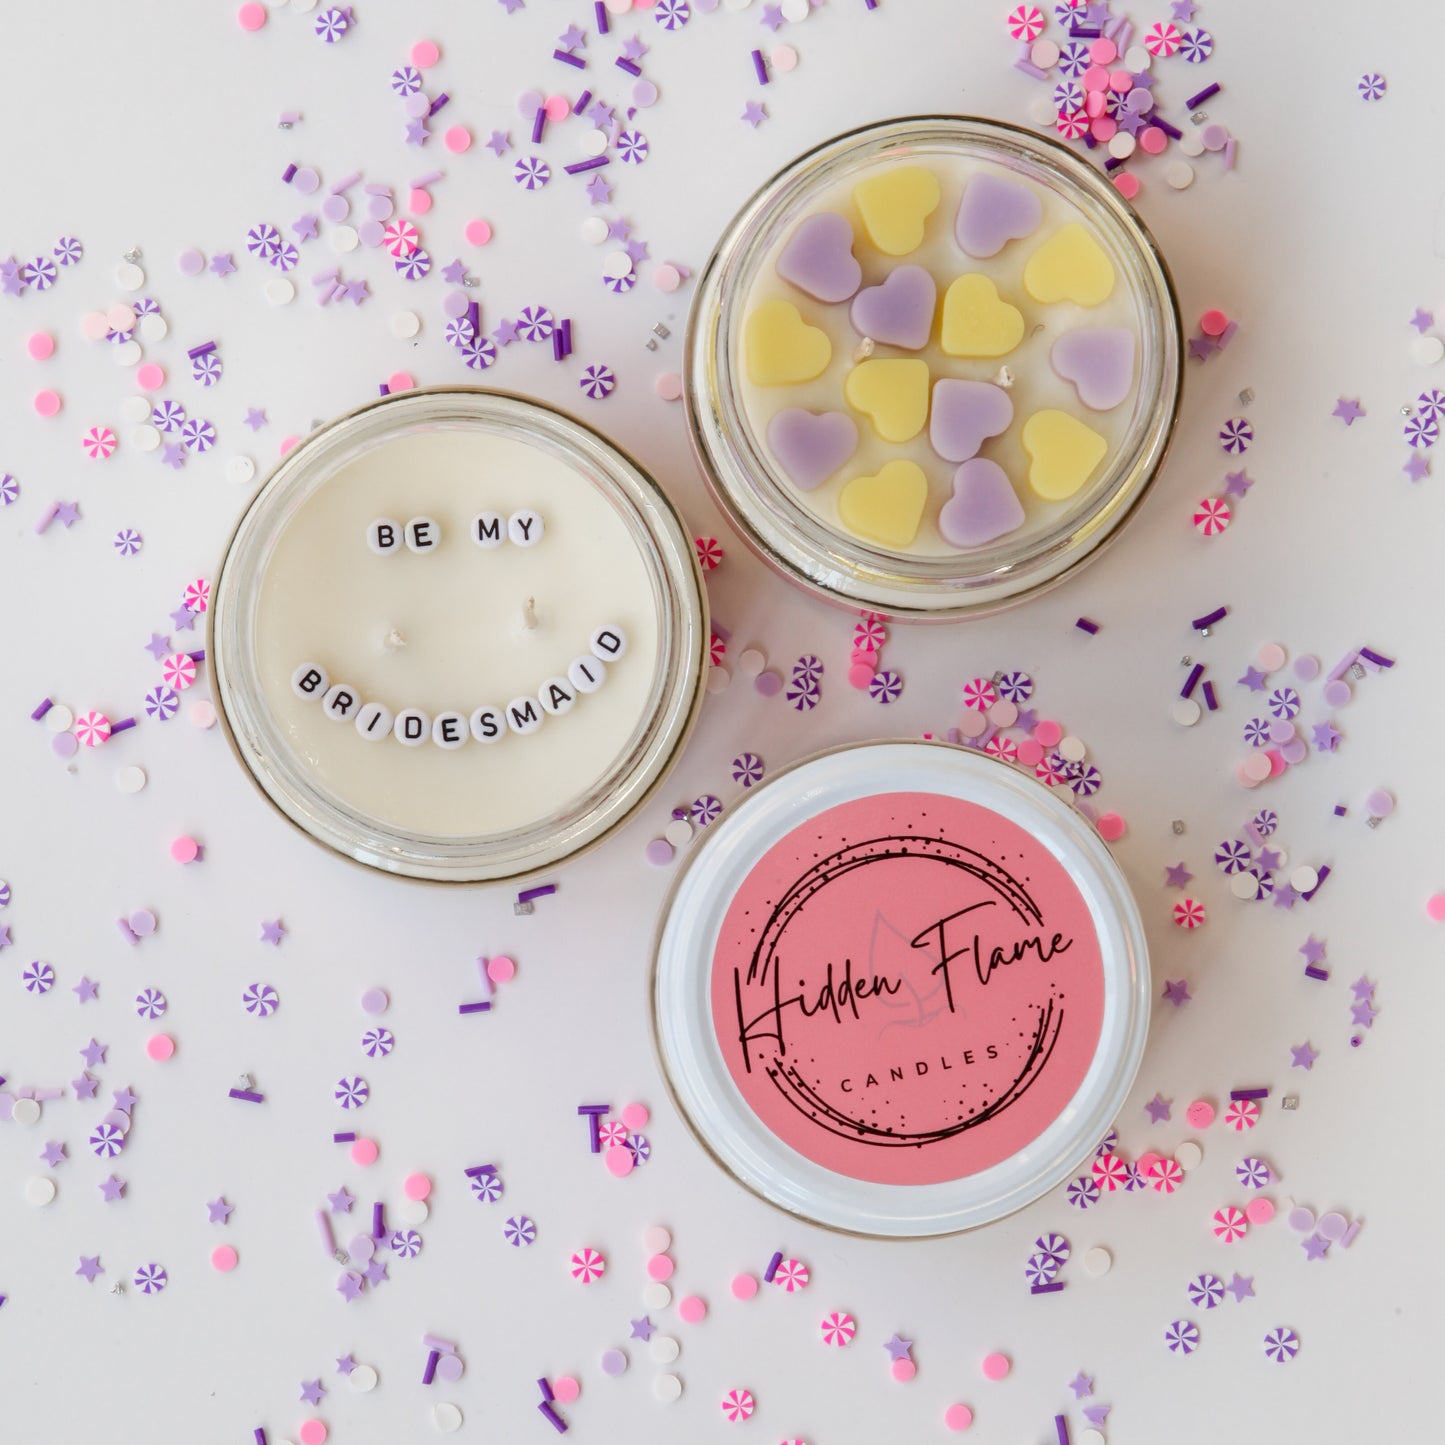 "Be my Bridesmaid" Love Heart Candle